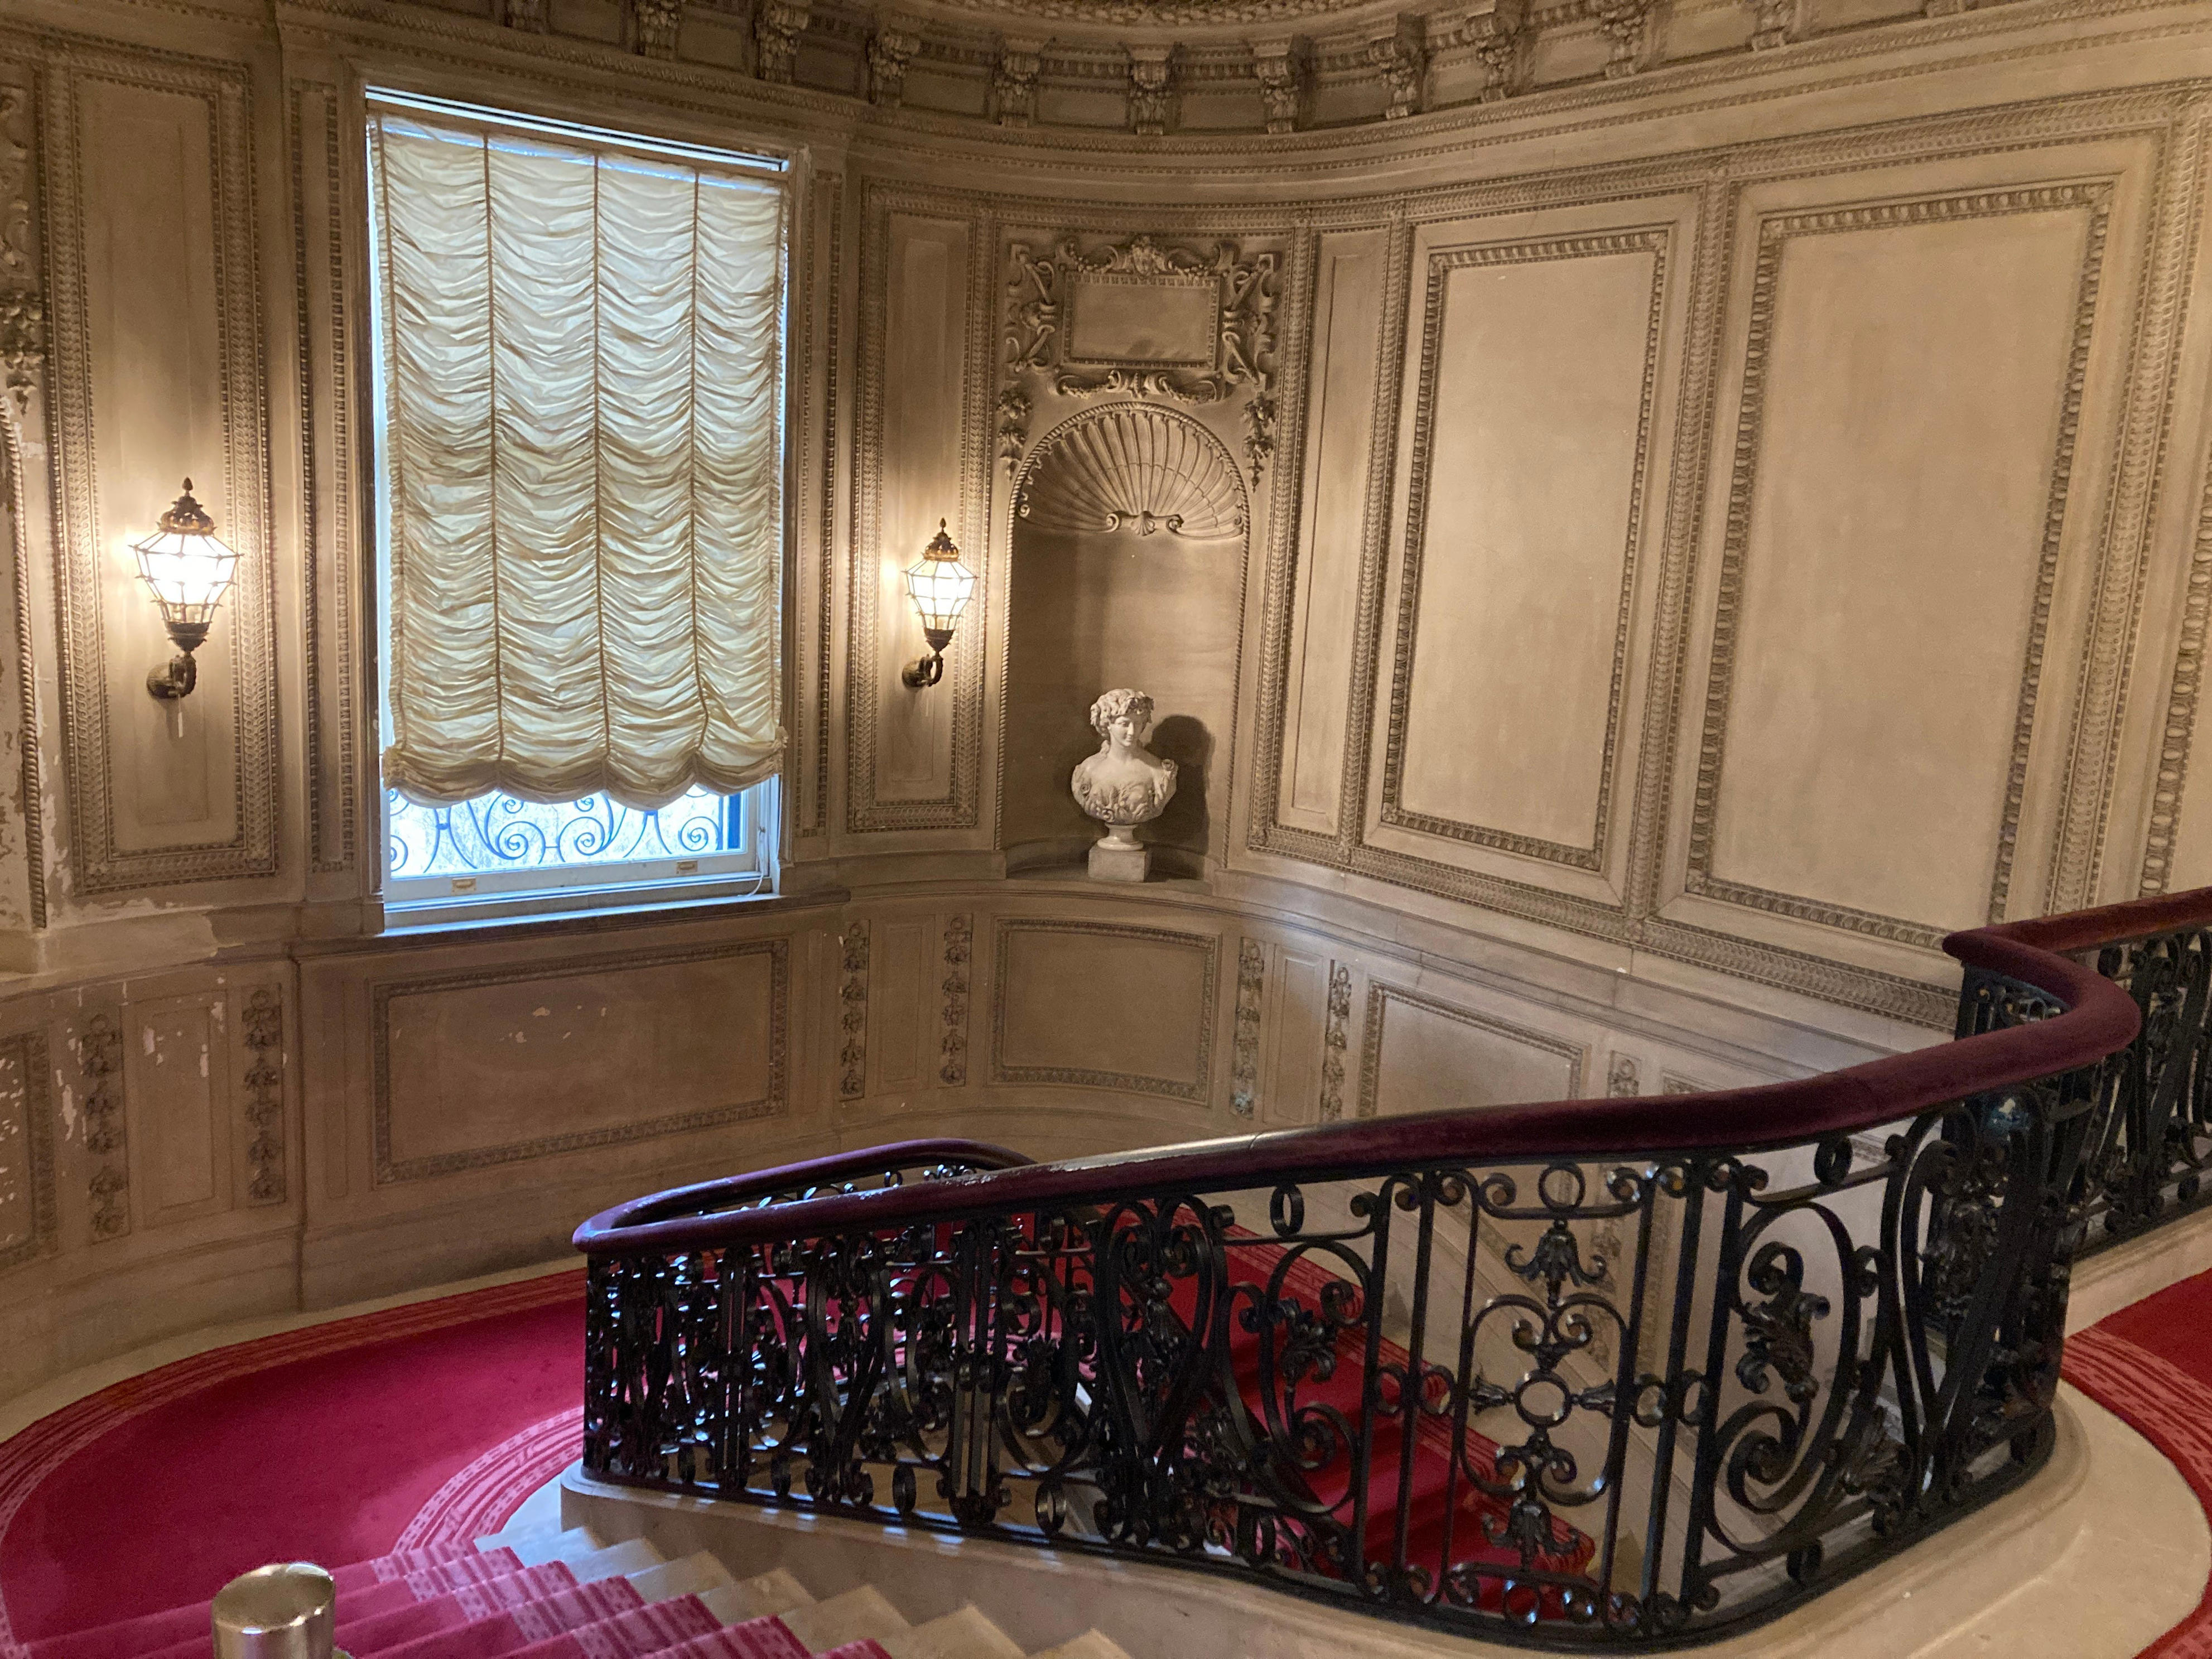 <p>The railing of the staircase was coated in velvet to make even climbing the stairs a comfortable, luxurious experience.</p>